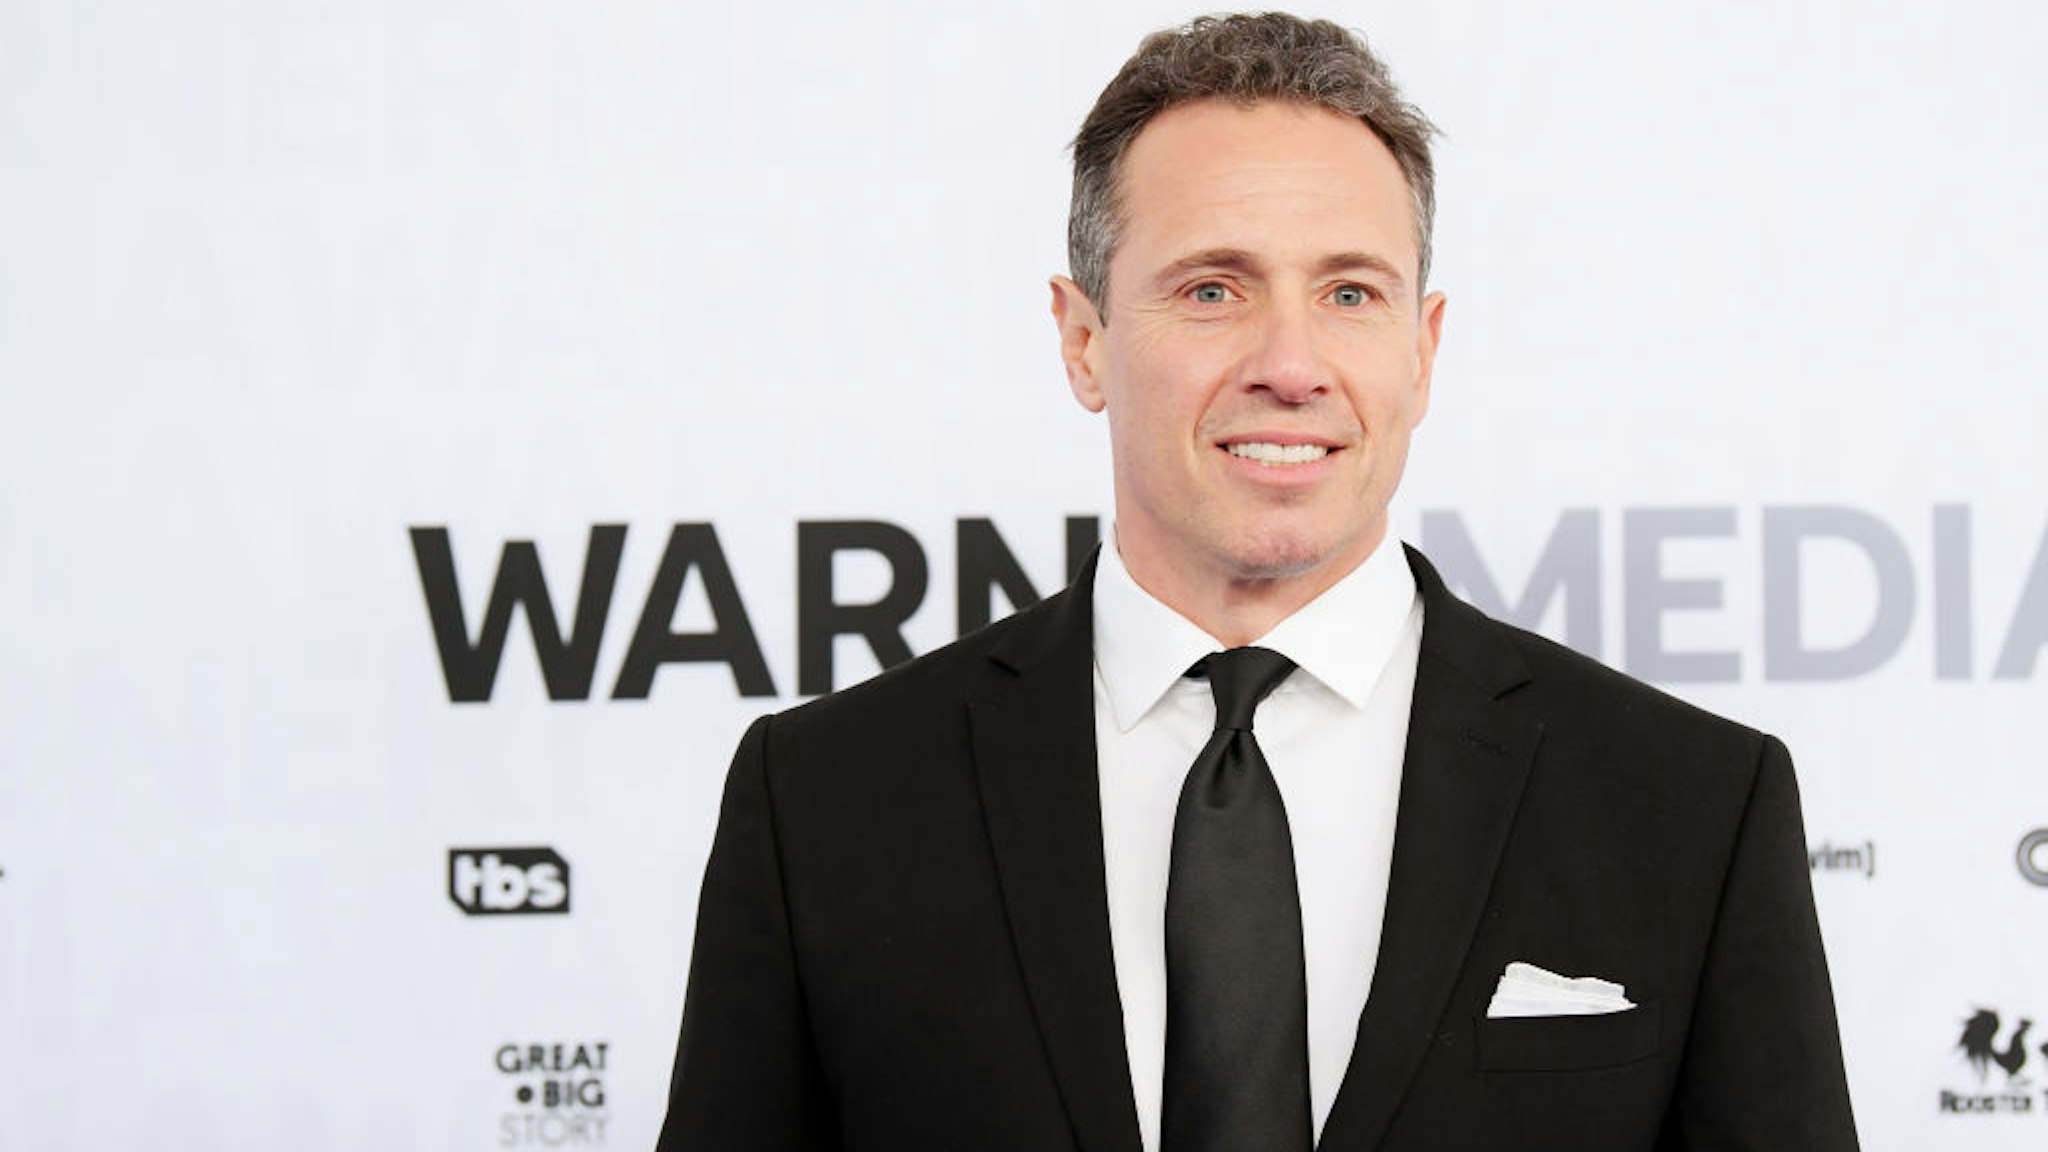 NEW YORK, NEW YORK - MAY 15: Chris Cuomo of CNN’s Cuomo Prime Time attends the WarnerMedia Upfront 2019 arrivals on the red carpet at The Theater at Madison Square Garden on May 15, 2019 in New York City. 602140 (Photo by Dimitrios Kambouris/Getty Images for WarnerMedia)